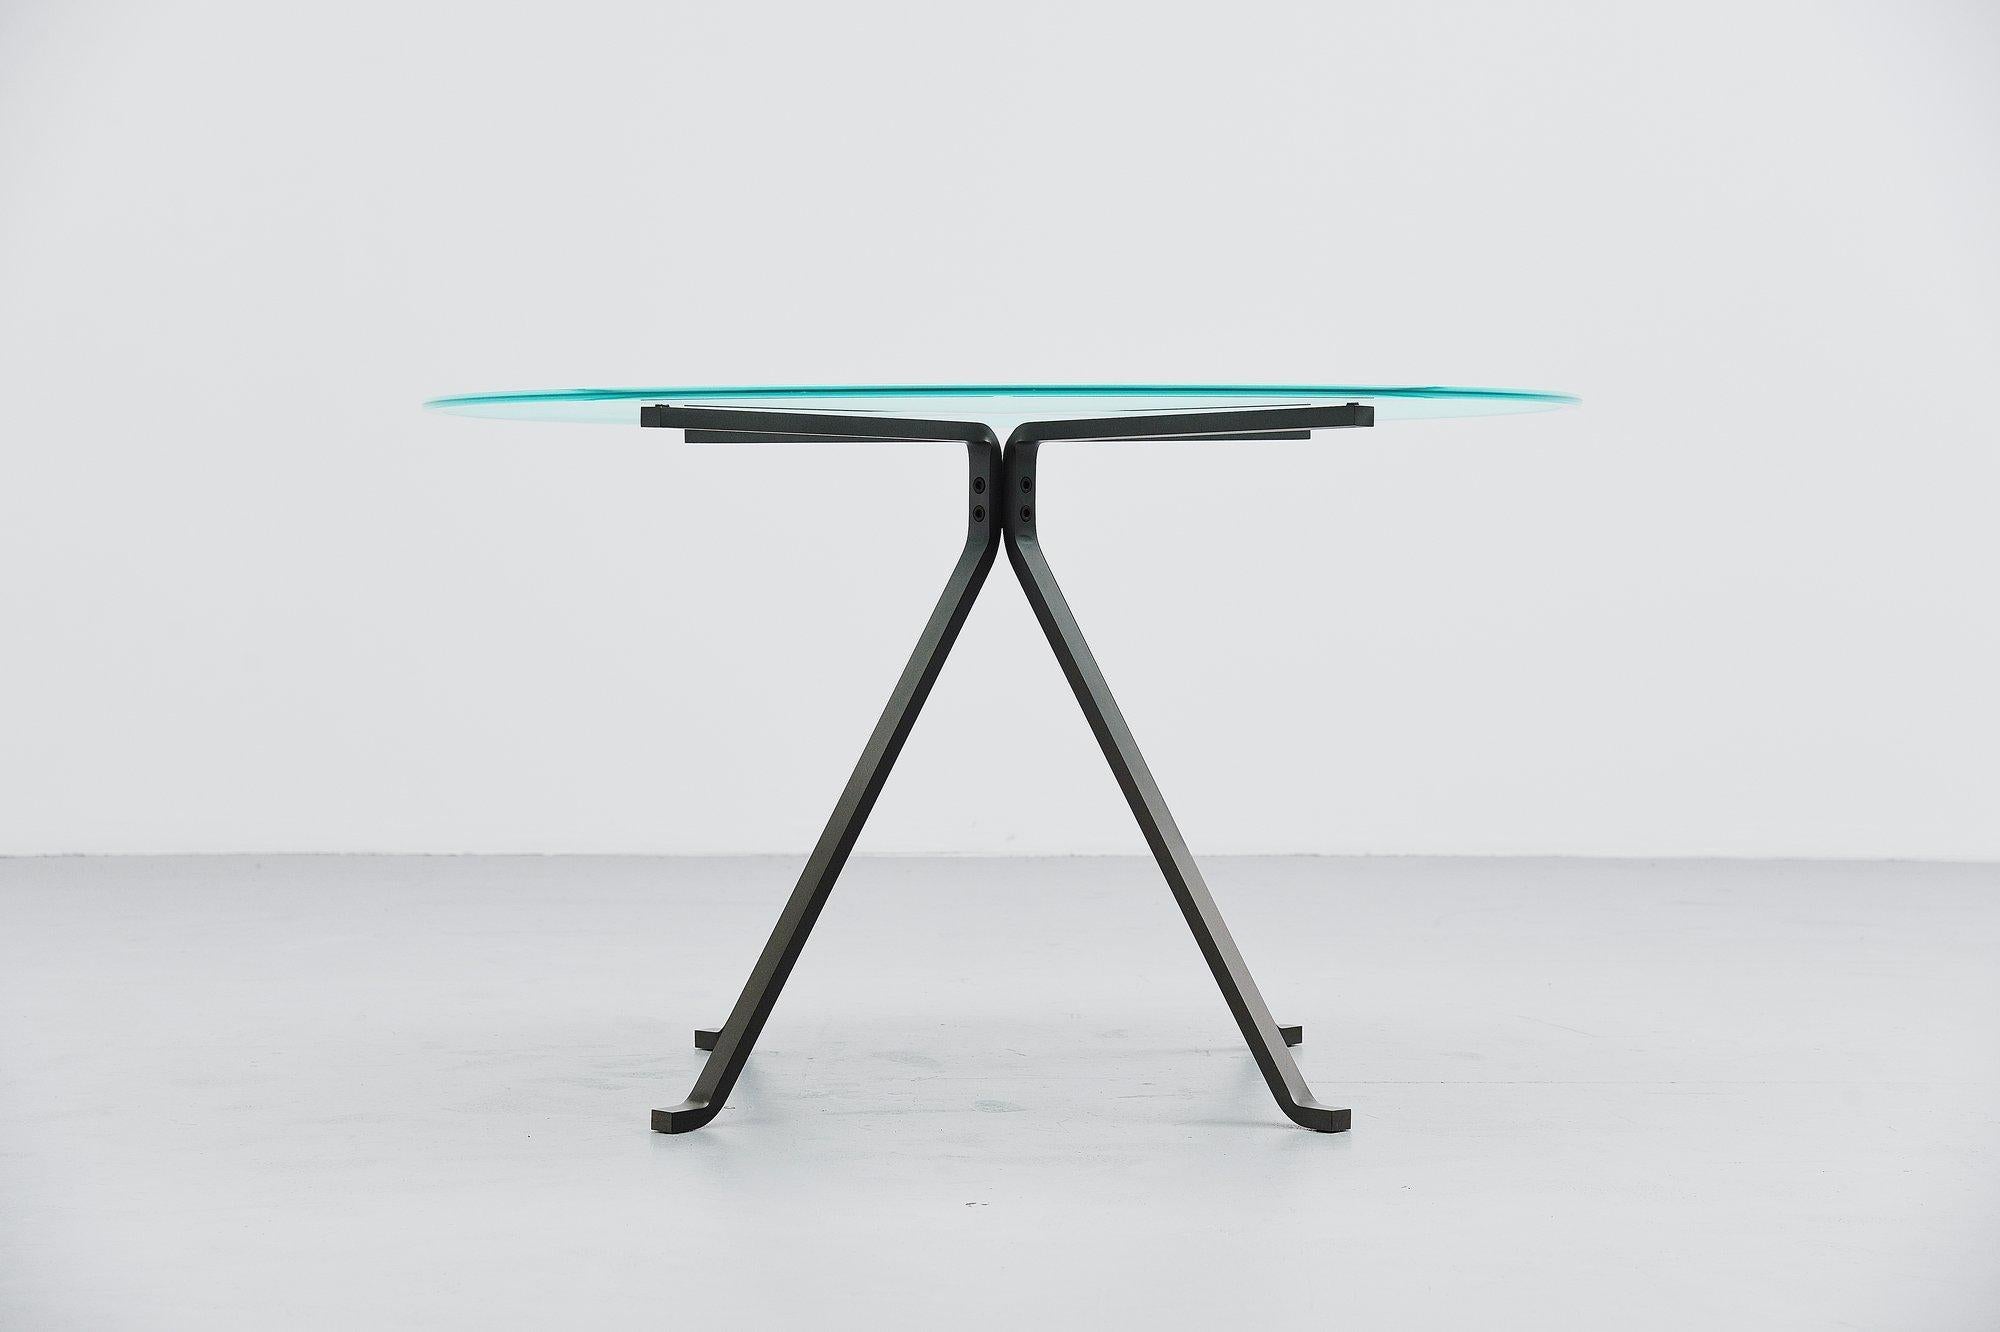 Very nice minimalistic dining table designed by Enzo Mari and manufactured by Driade, Italy, 1973. This table has heavy solid metal folded frame and a partially sanded round glass top which looks really nice. The tables is in very good original